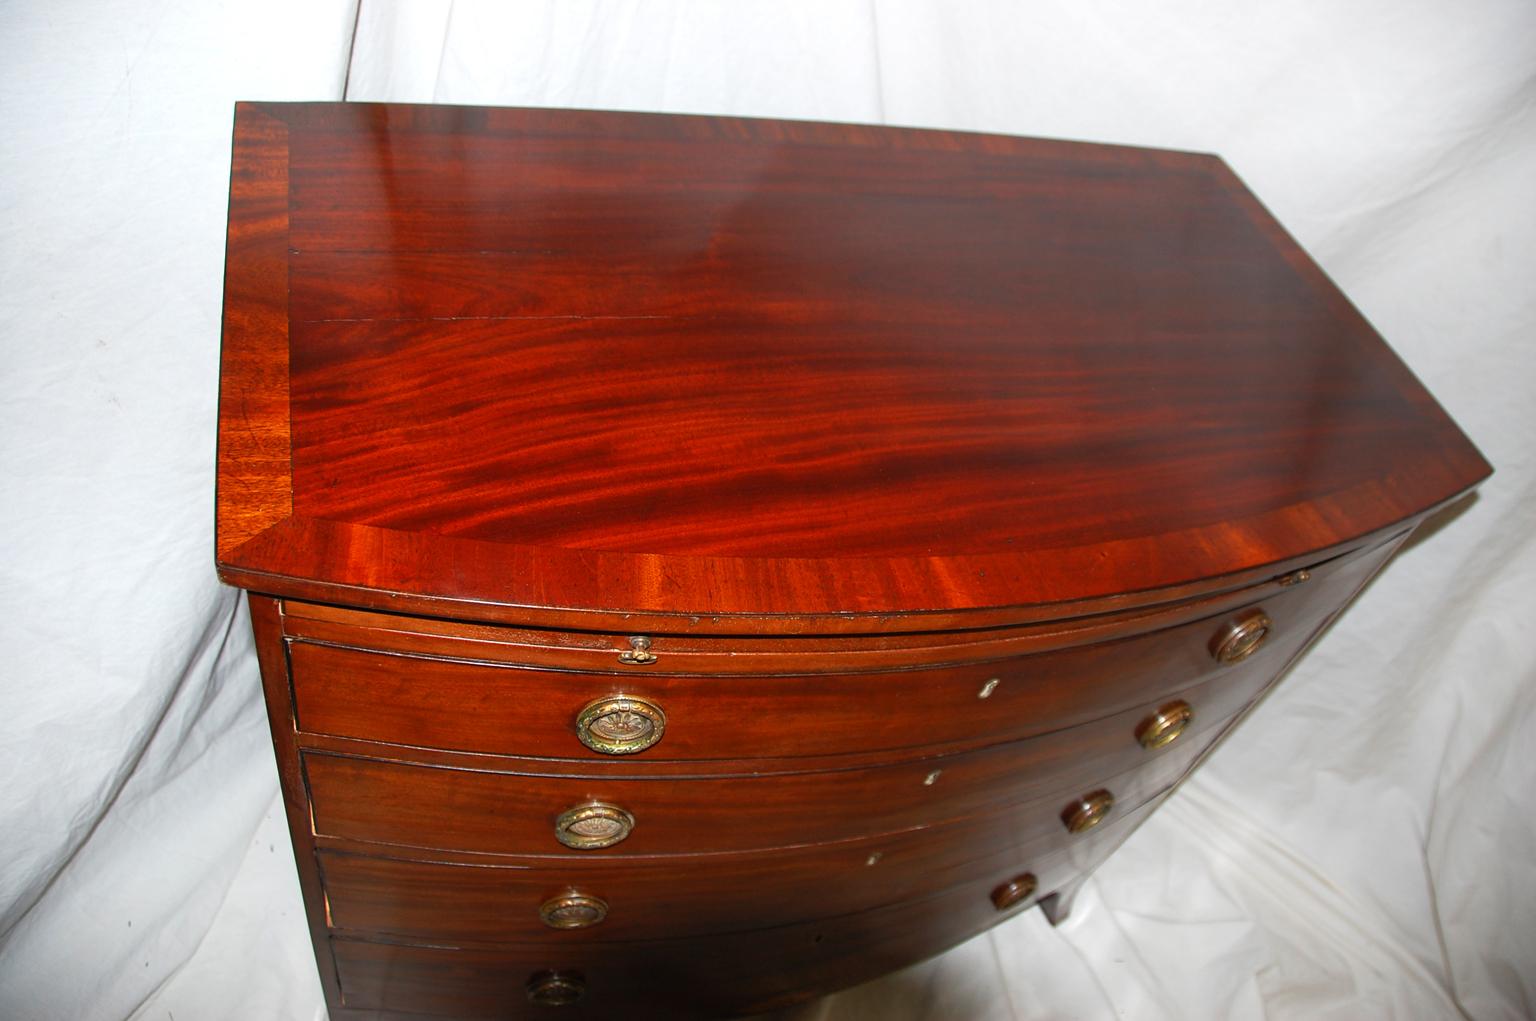 English Georgian Hepplewhite period mahogany bowfront chest of four graduated drawers with dressing slide. The graceful shaped skirt has a sunburst inlay in satinwood and boxwood which sets this chest apart from the normal. This small chest of